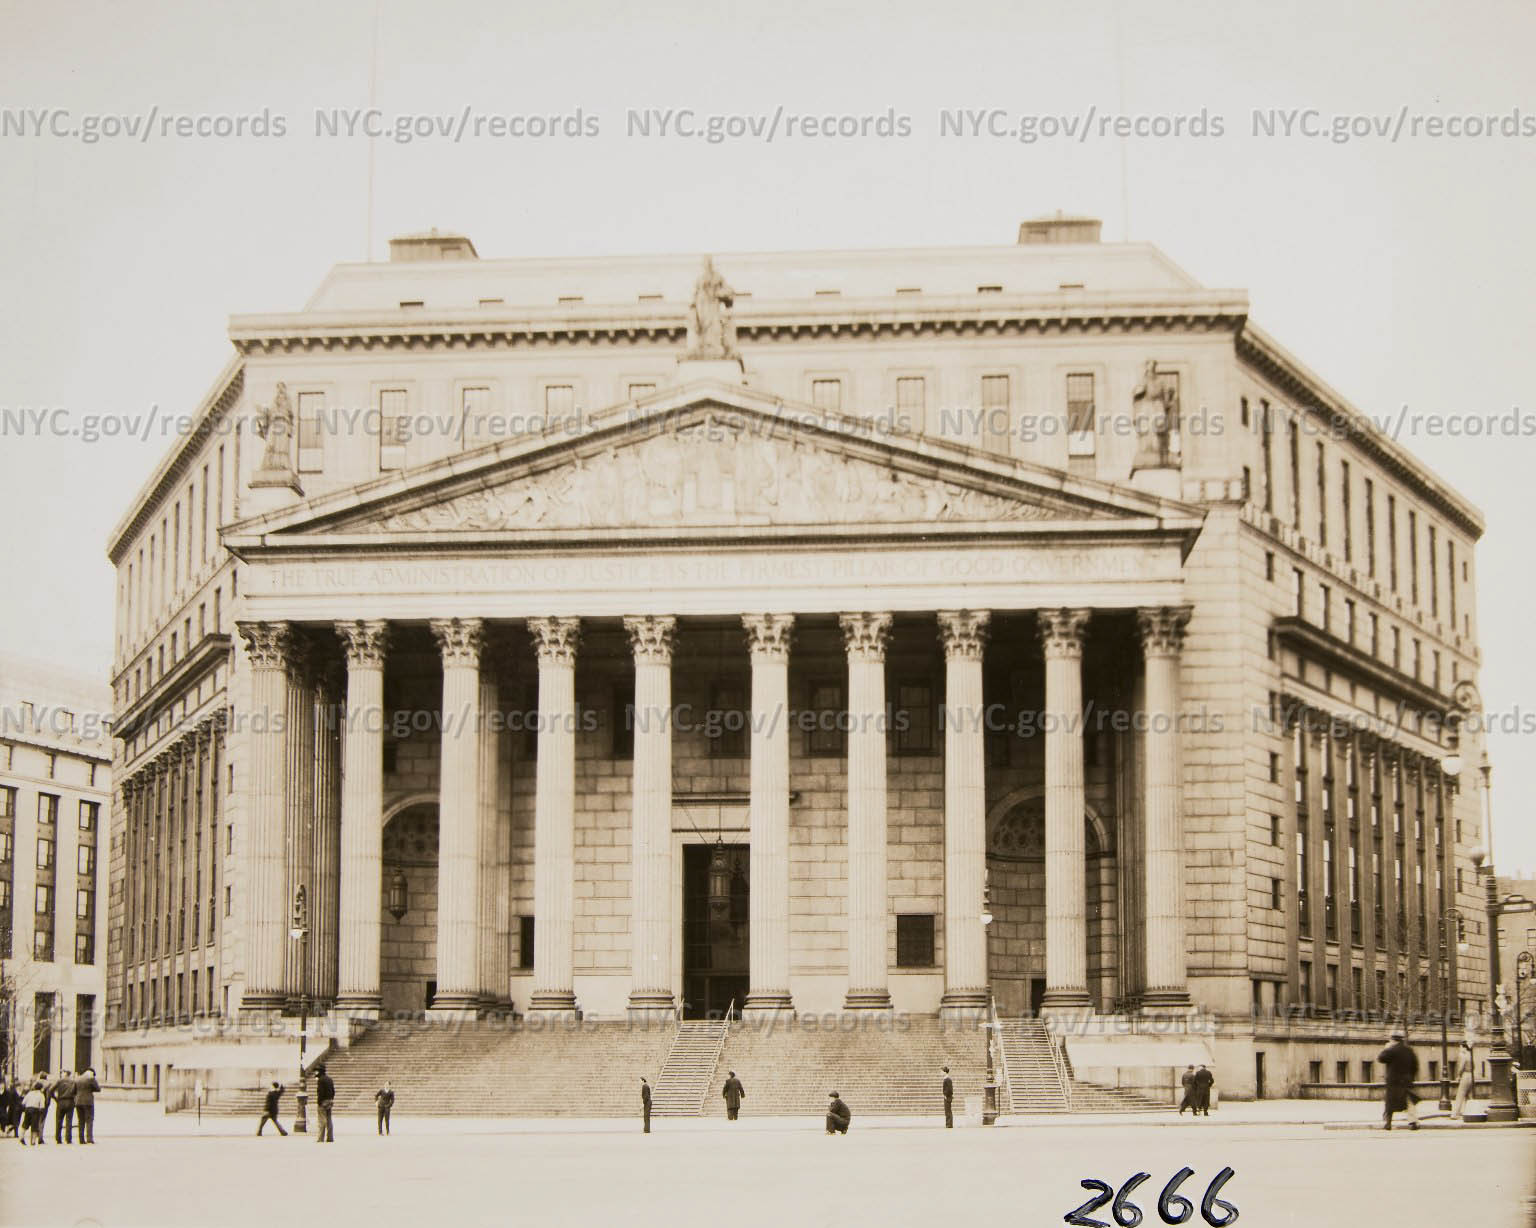 New York County Courthouse, boys playing baseball in front of courthouse.